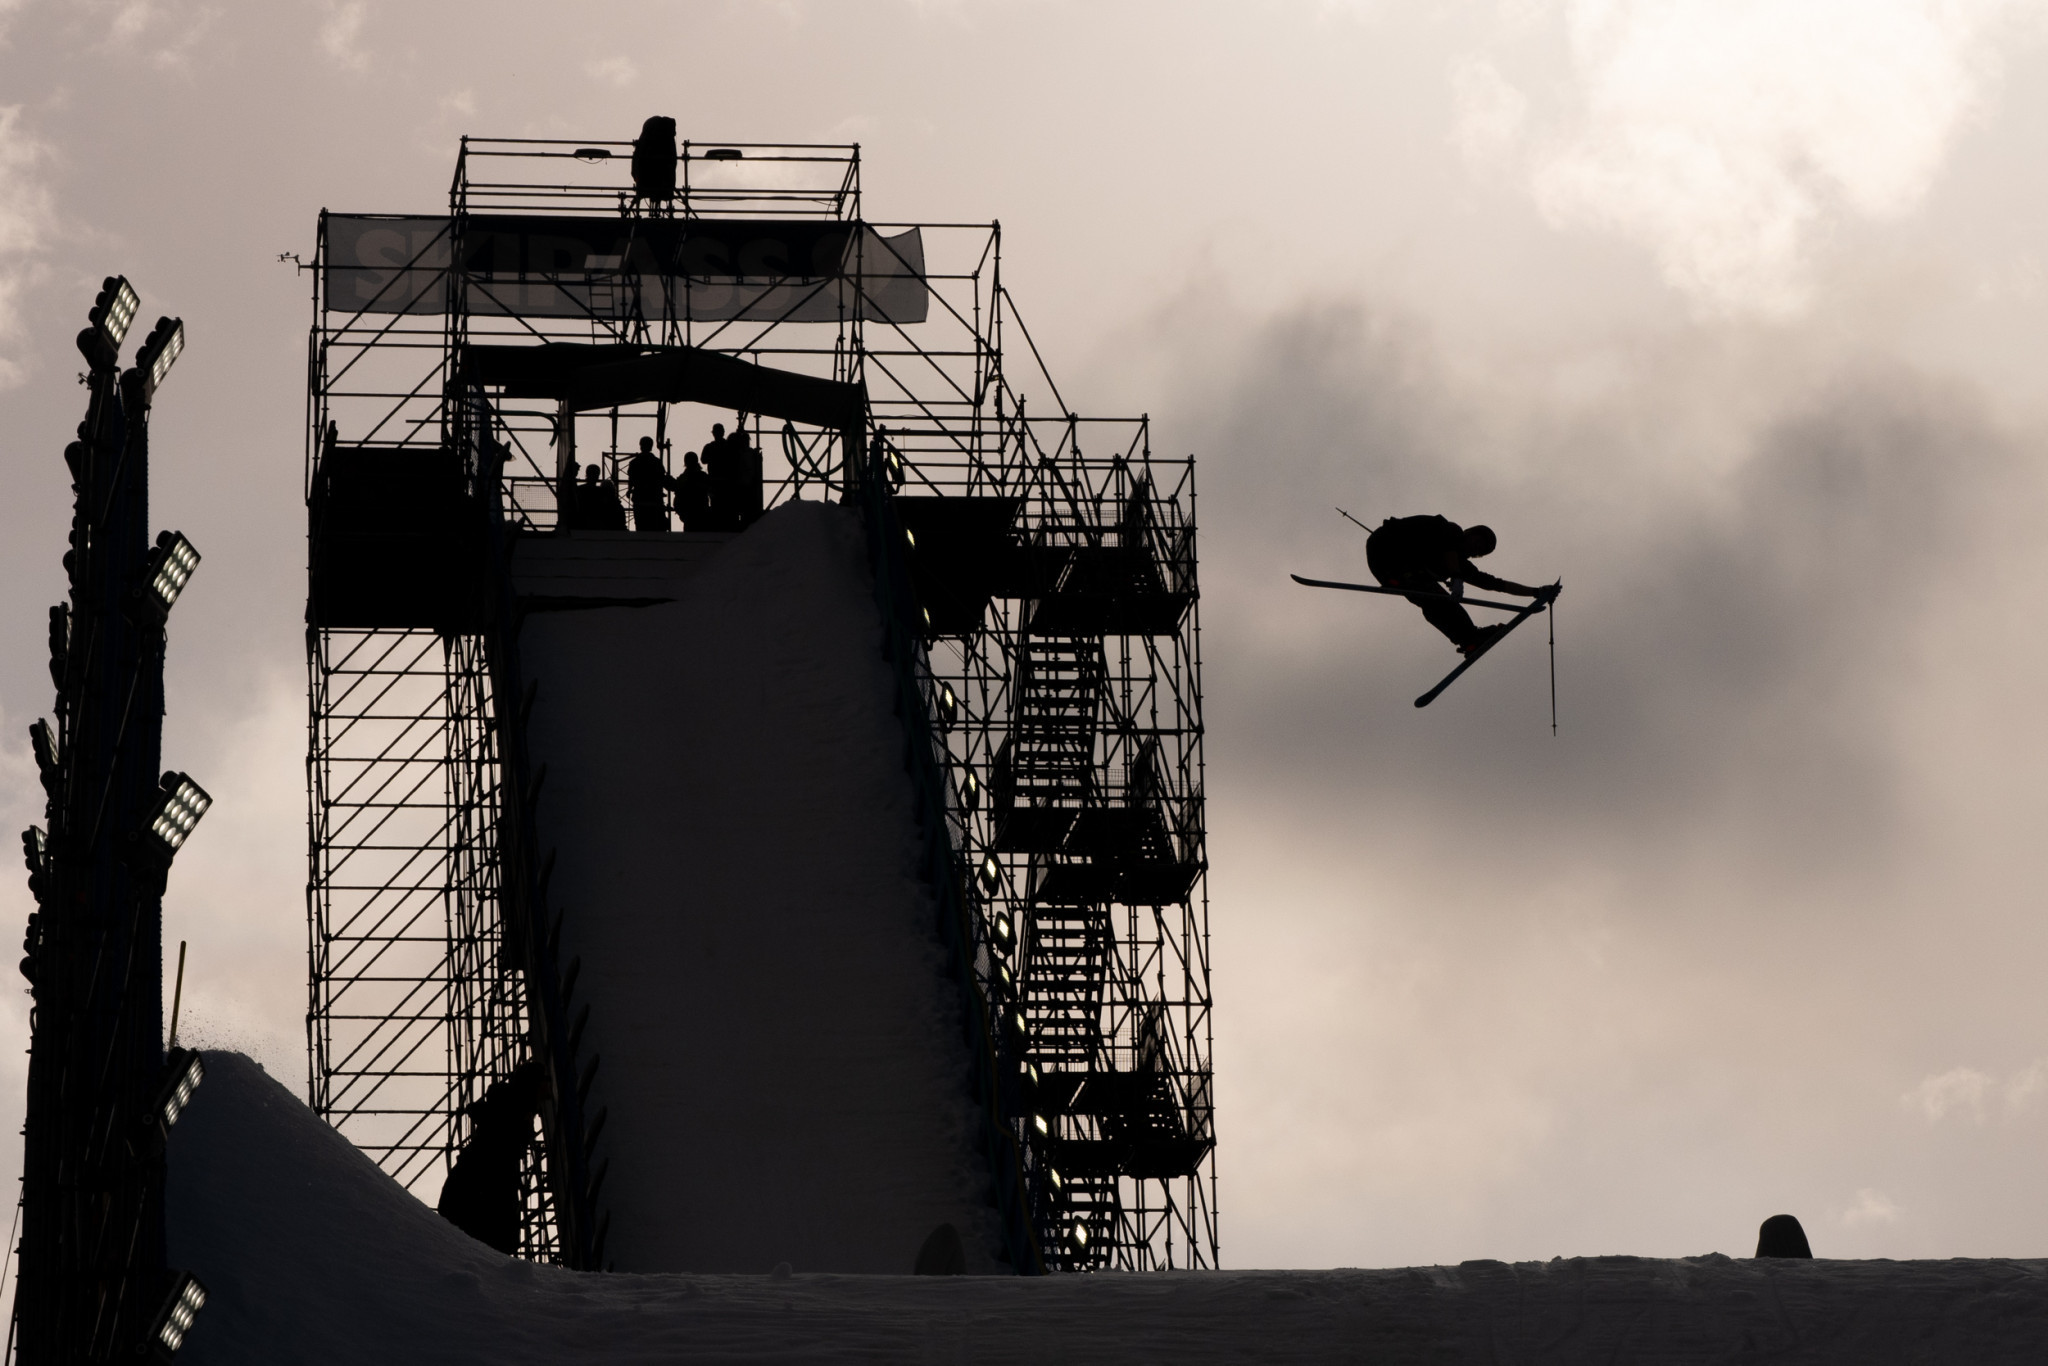 Modena is set to host the FIS Big Air World Cup ©US Ski and Snowboard